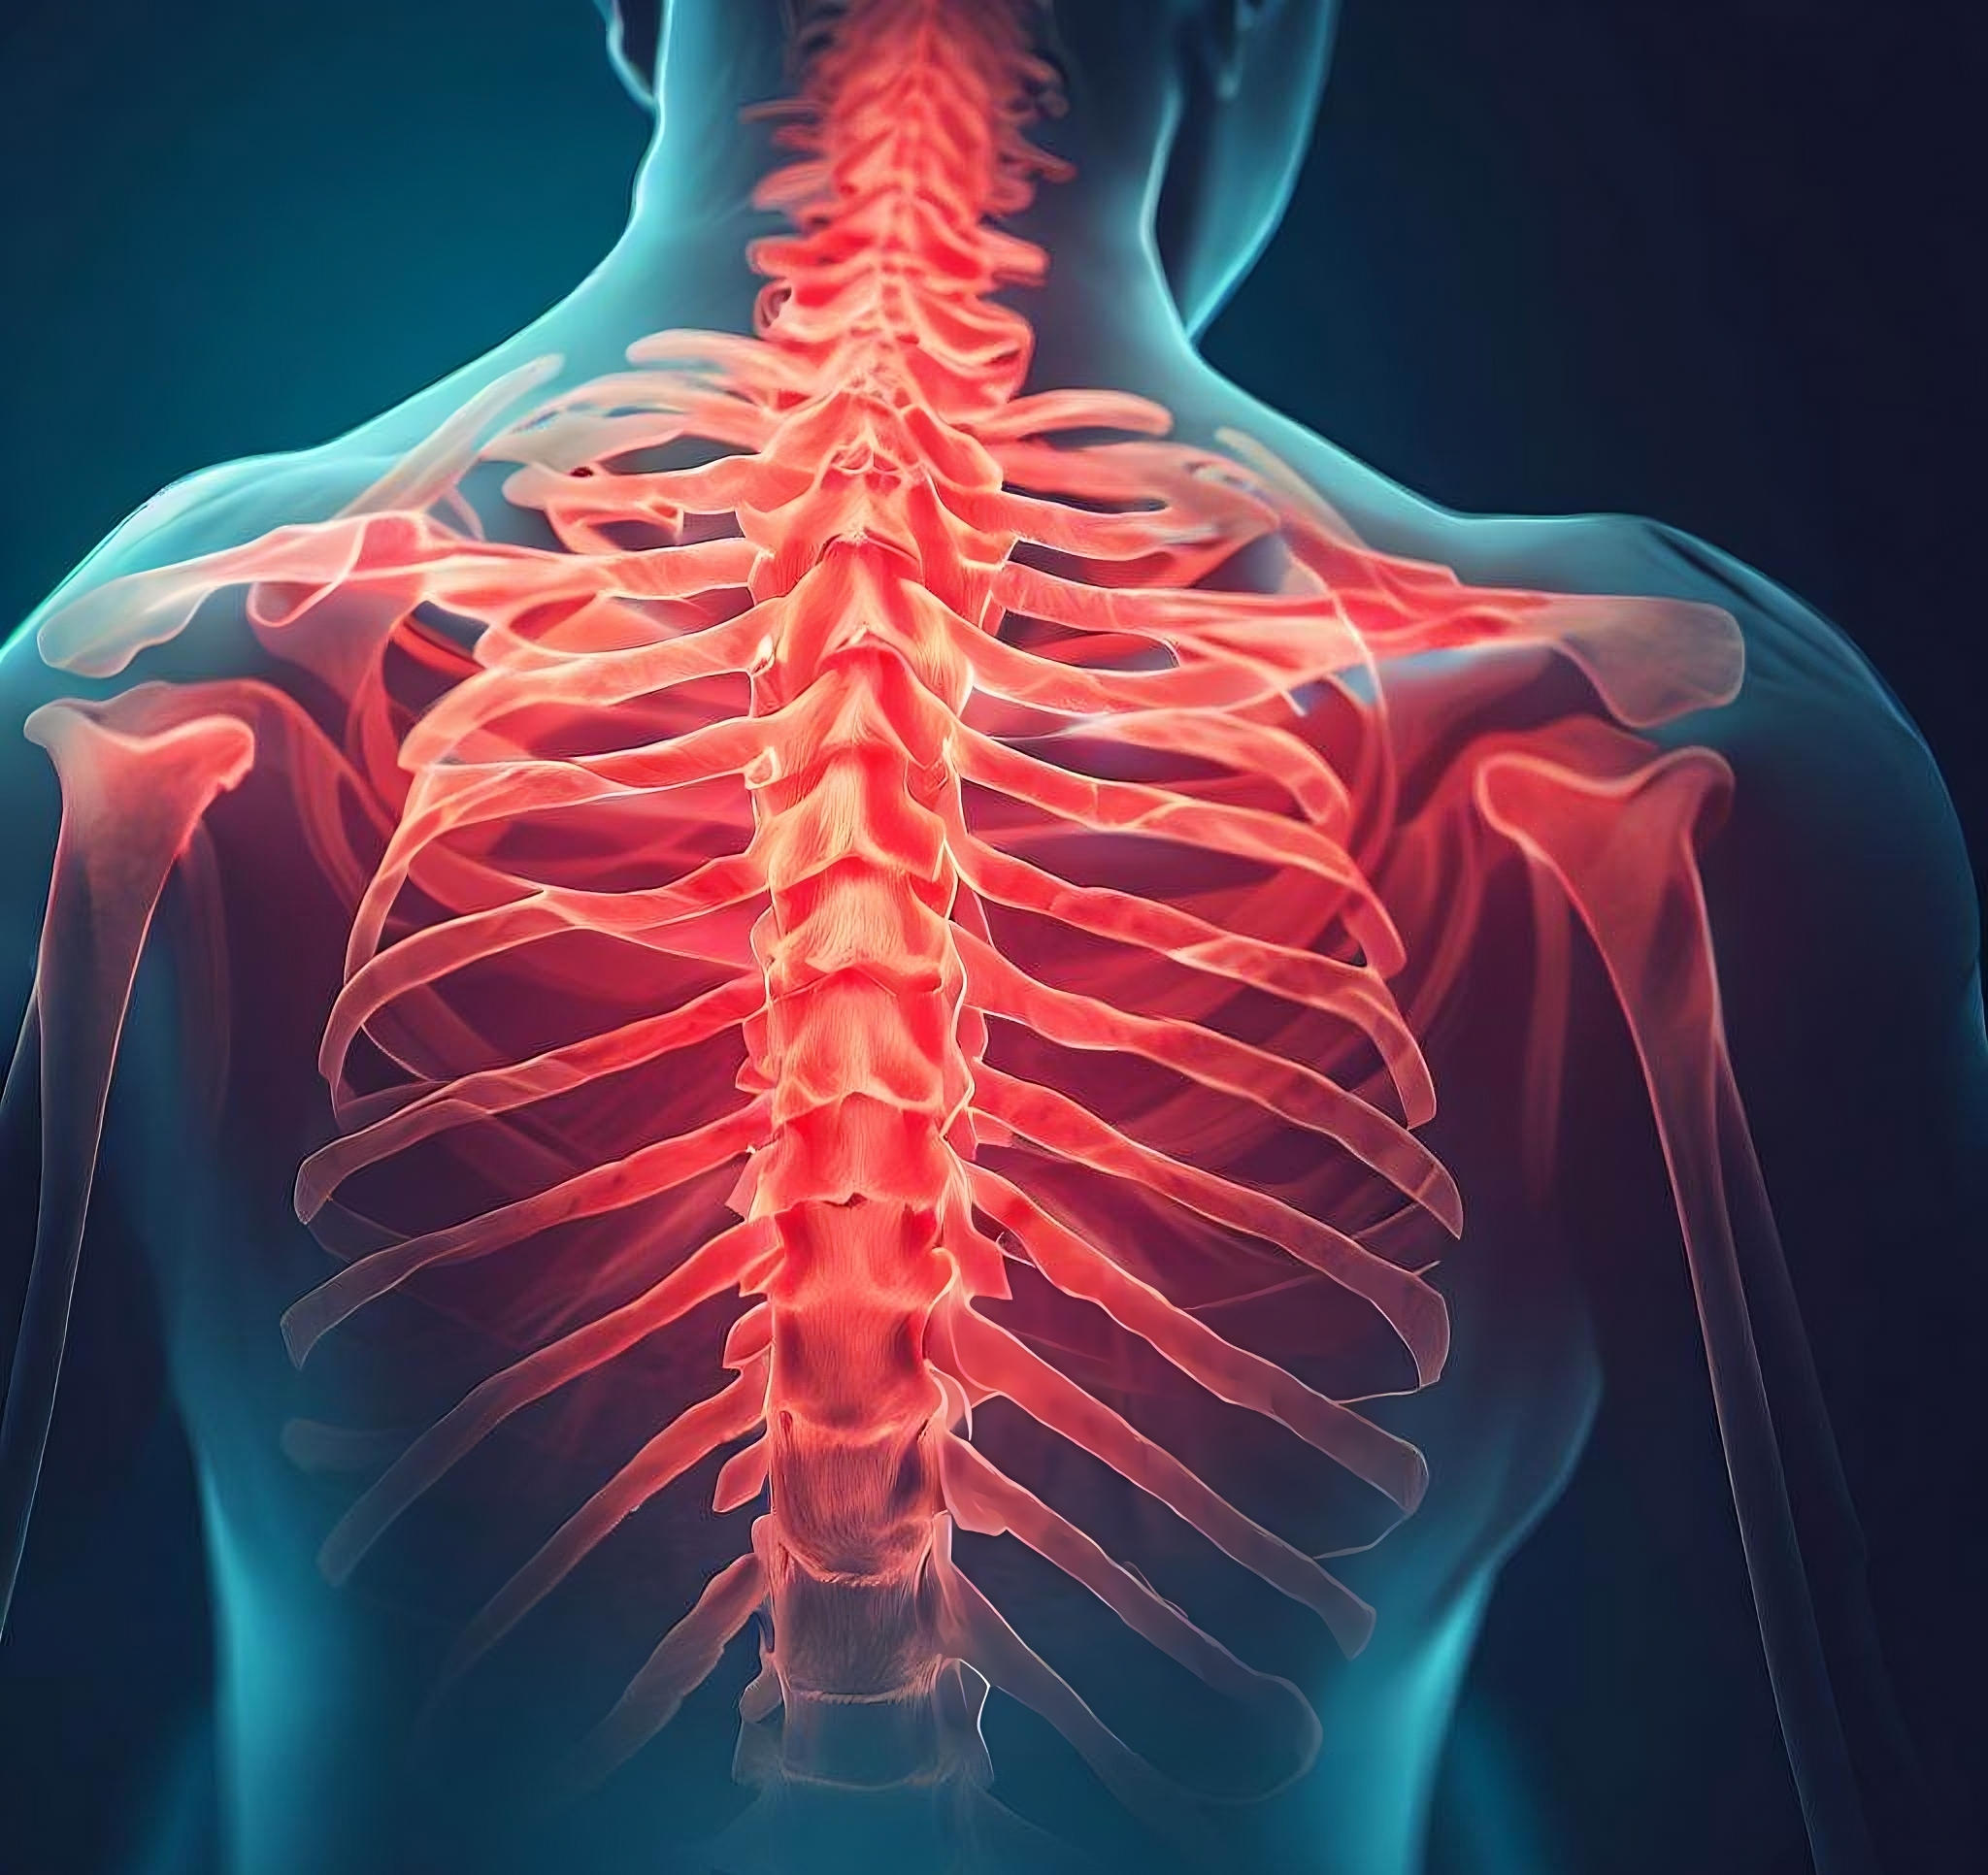 New Immune System Discovery Opens New Doors for Spinal Cord Injuries